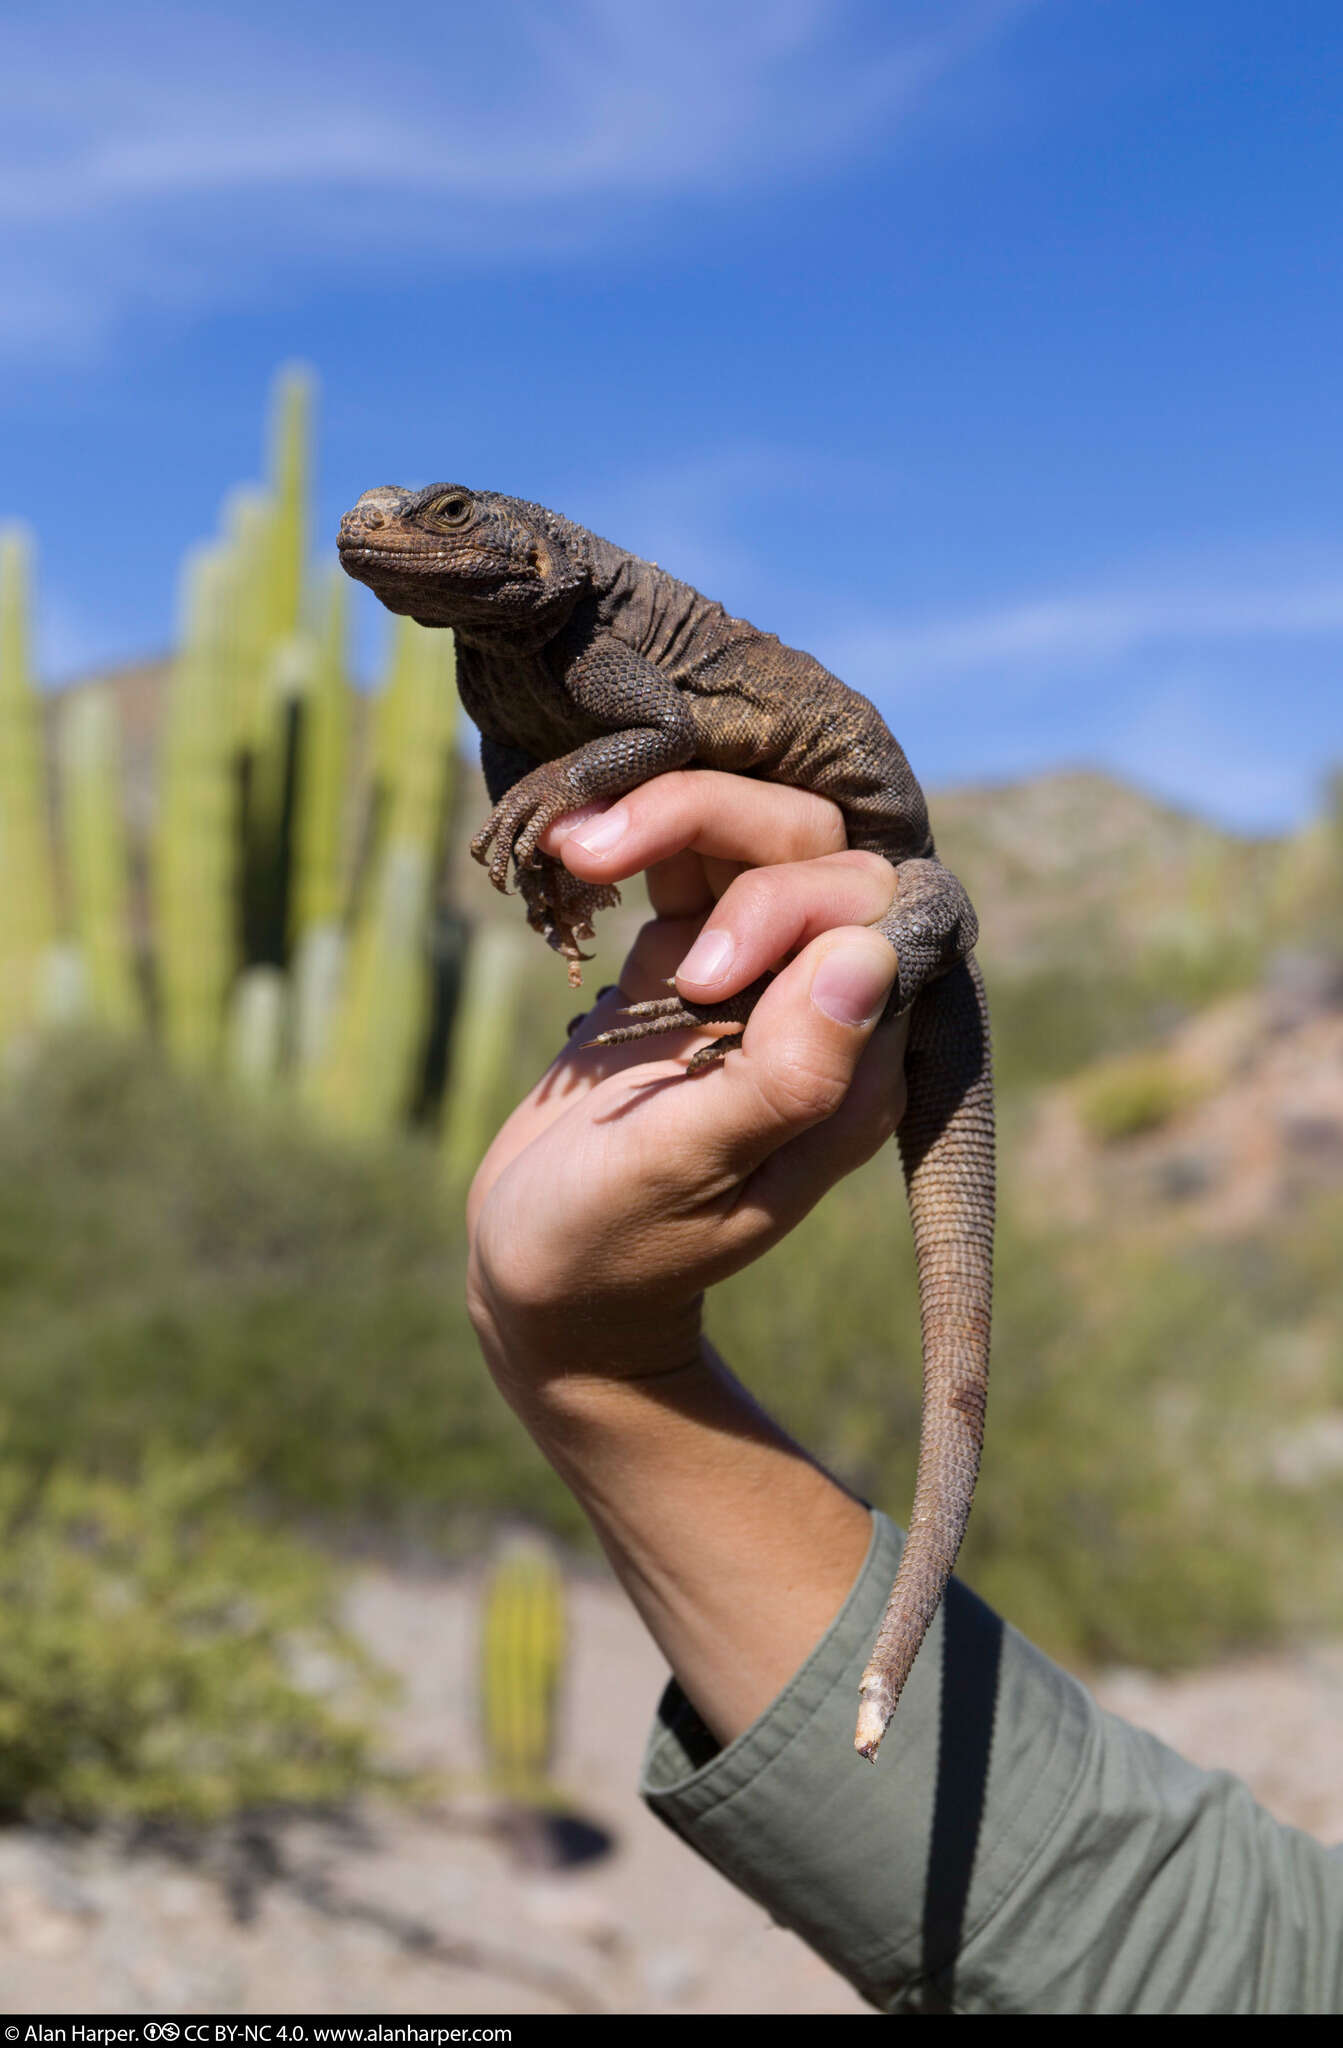 Image of Spotted Chuckwalla